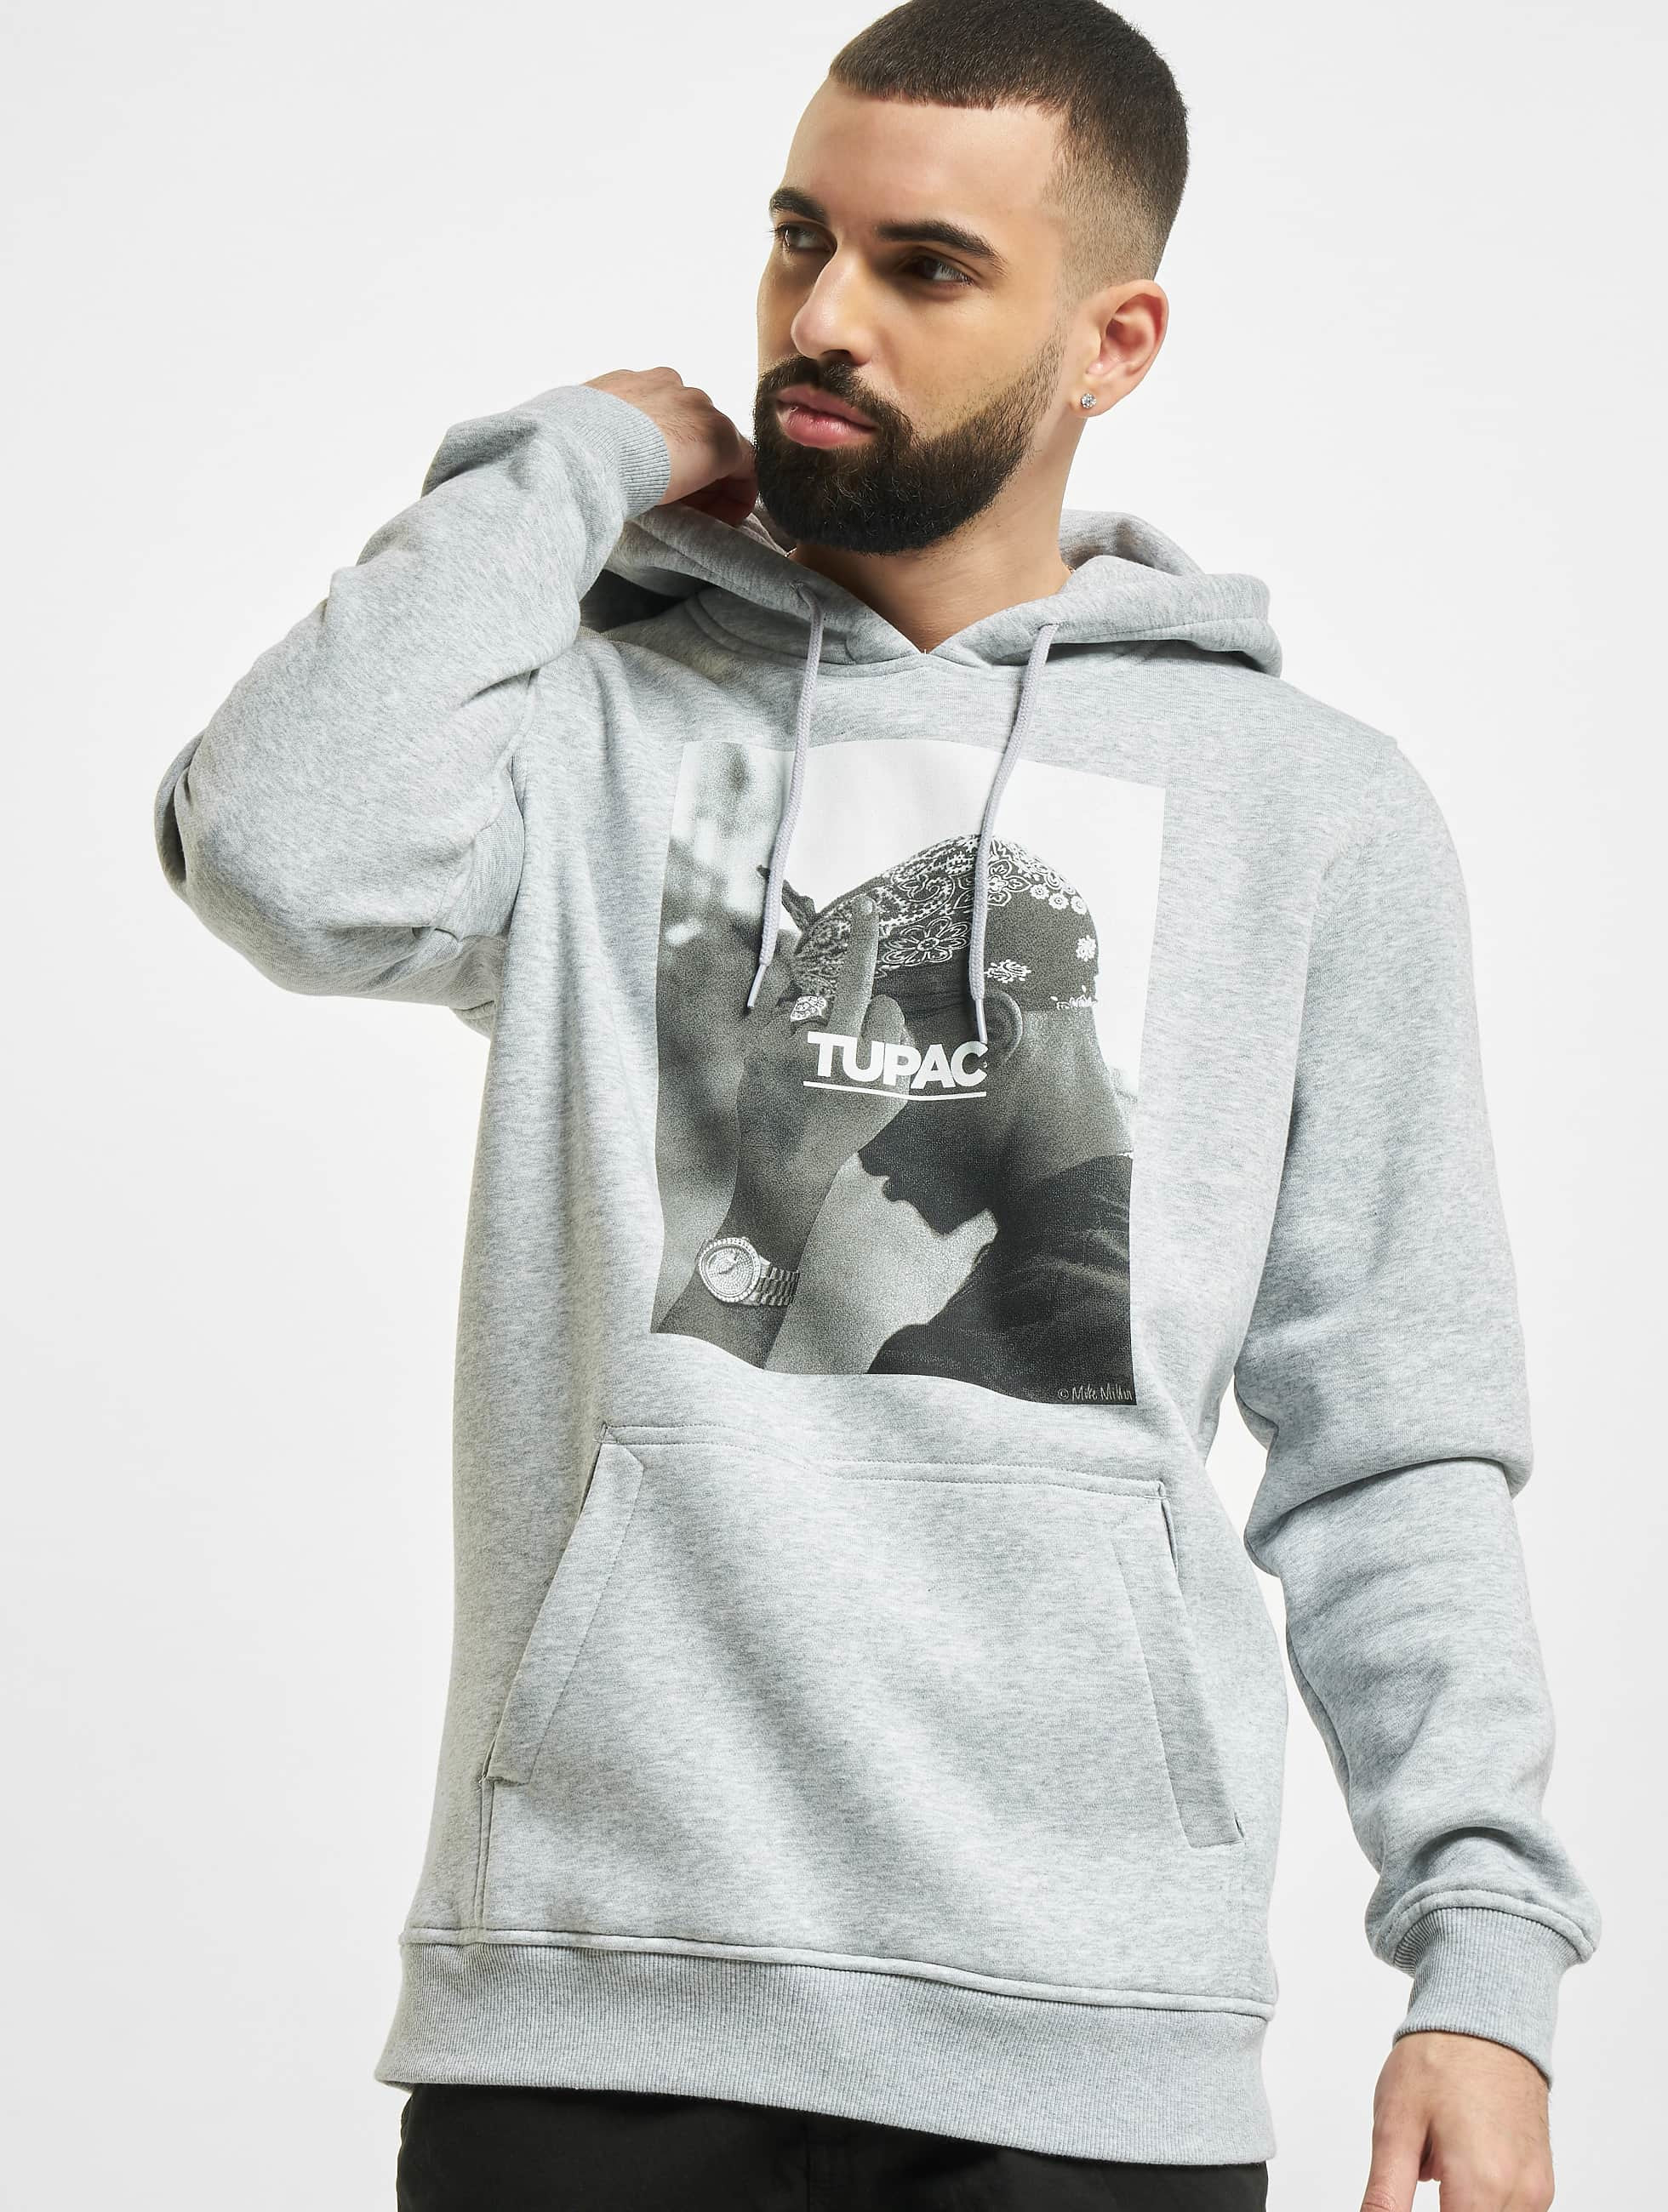 Mister Tee Ropa superiór / Sudadera 2pac The World en gris 822275